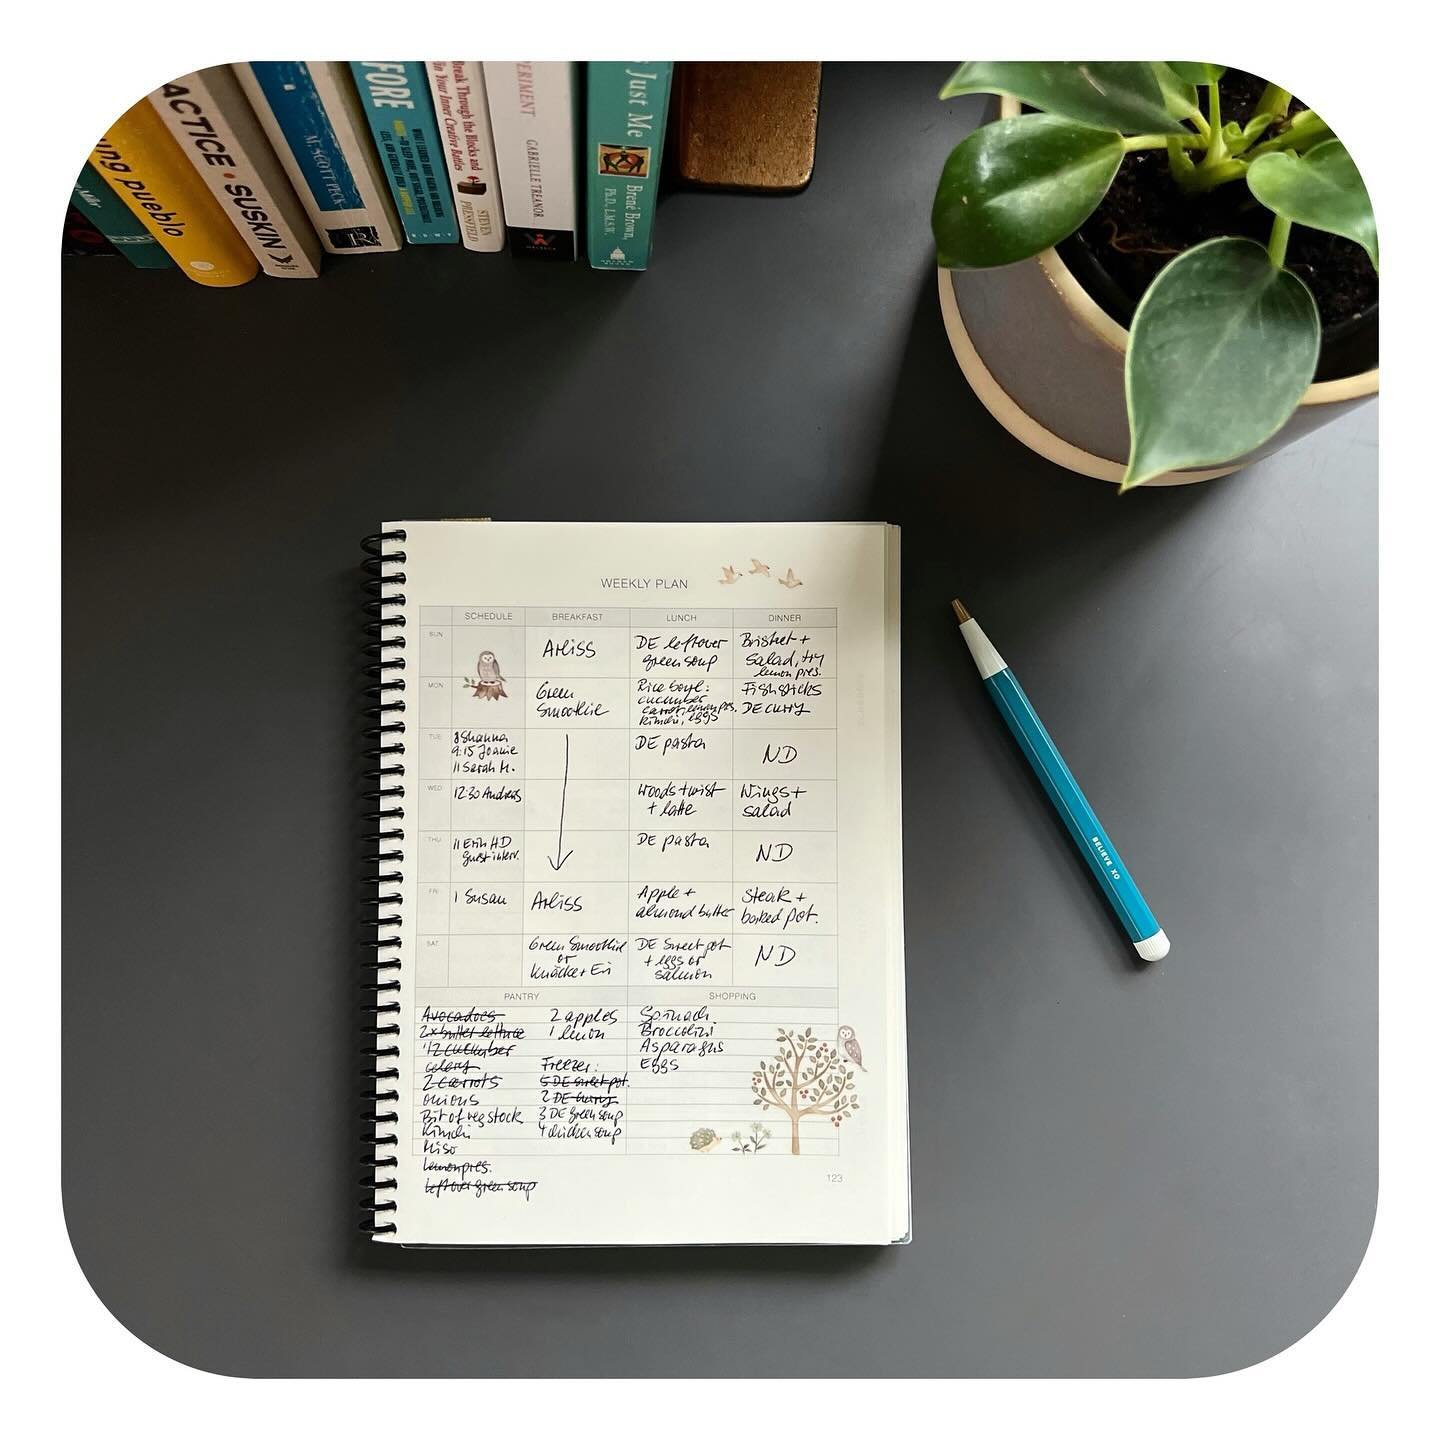 Meal planning used to utterly overwhelm me. I, who normally loves spreadsheets and organizing, would stare at a blank grid of the week ahead&mdash;often with a couple of lovely cookbooks next to me&mdash;and freeze. 

The progress to get me to this p